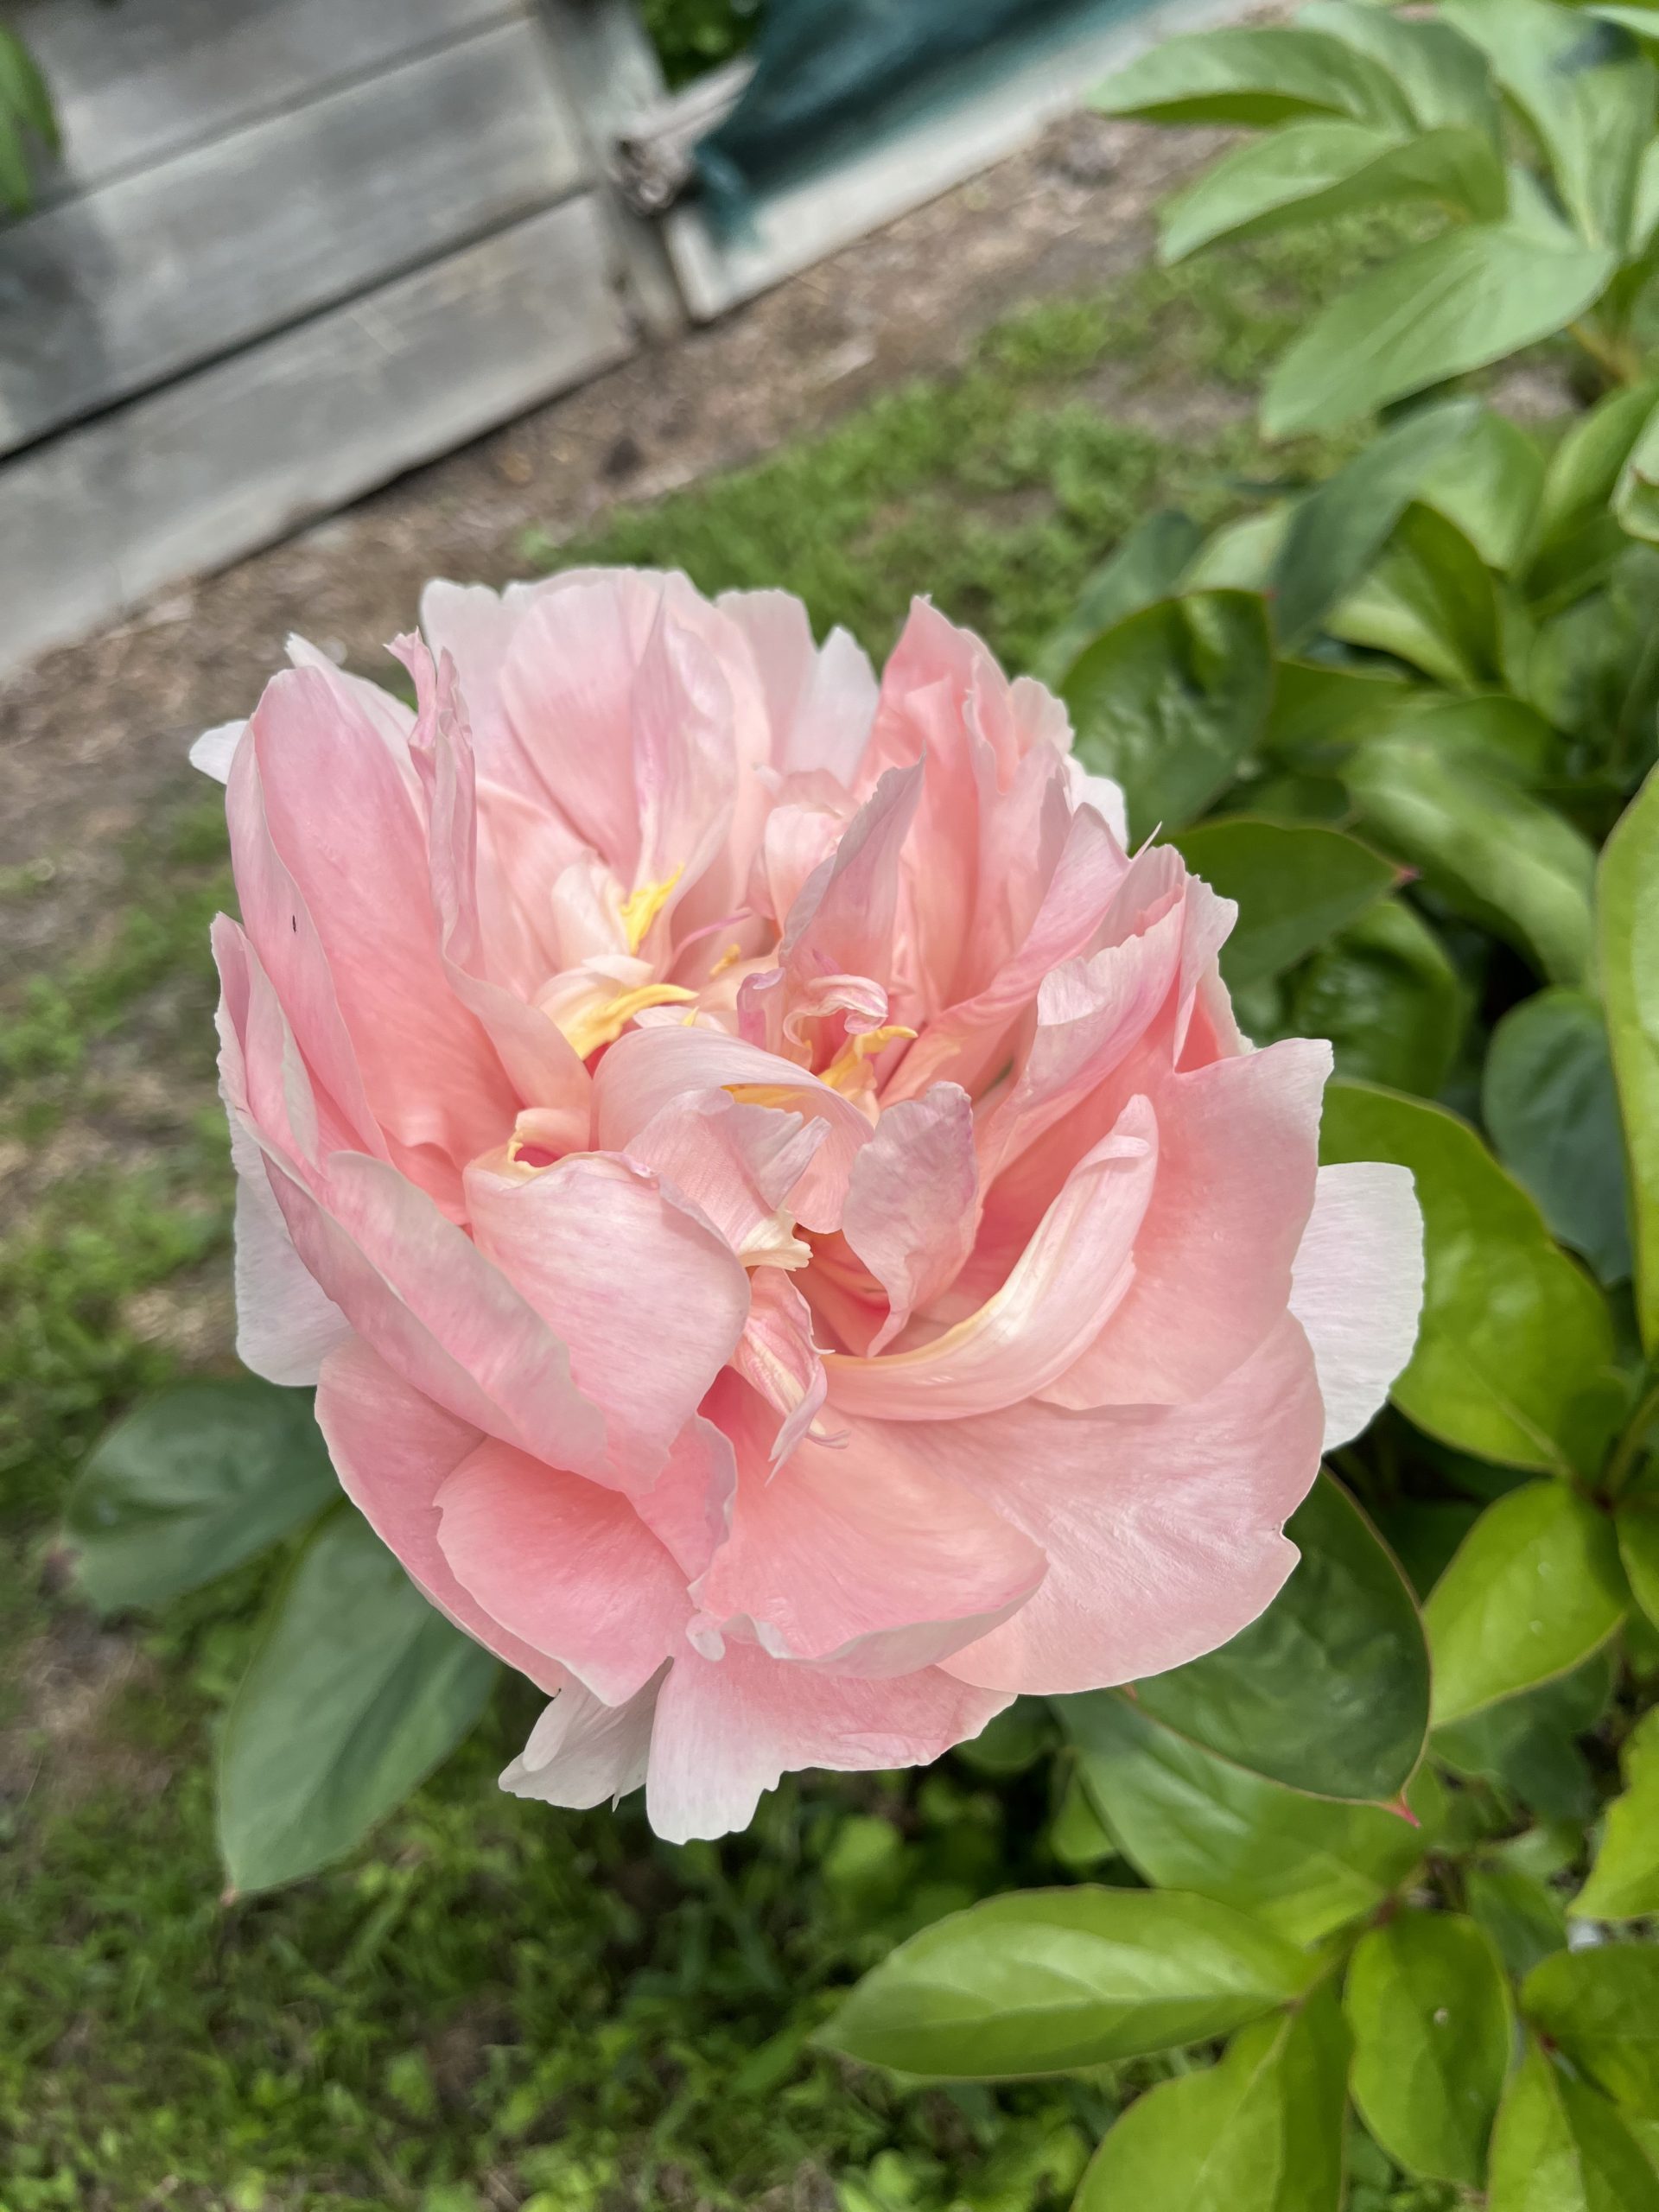 How to care for your Peony bloom – NZ